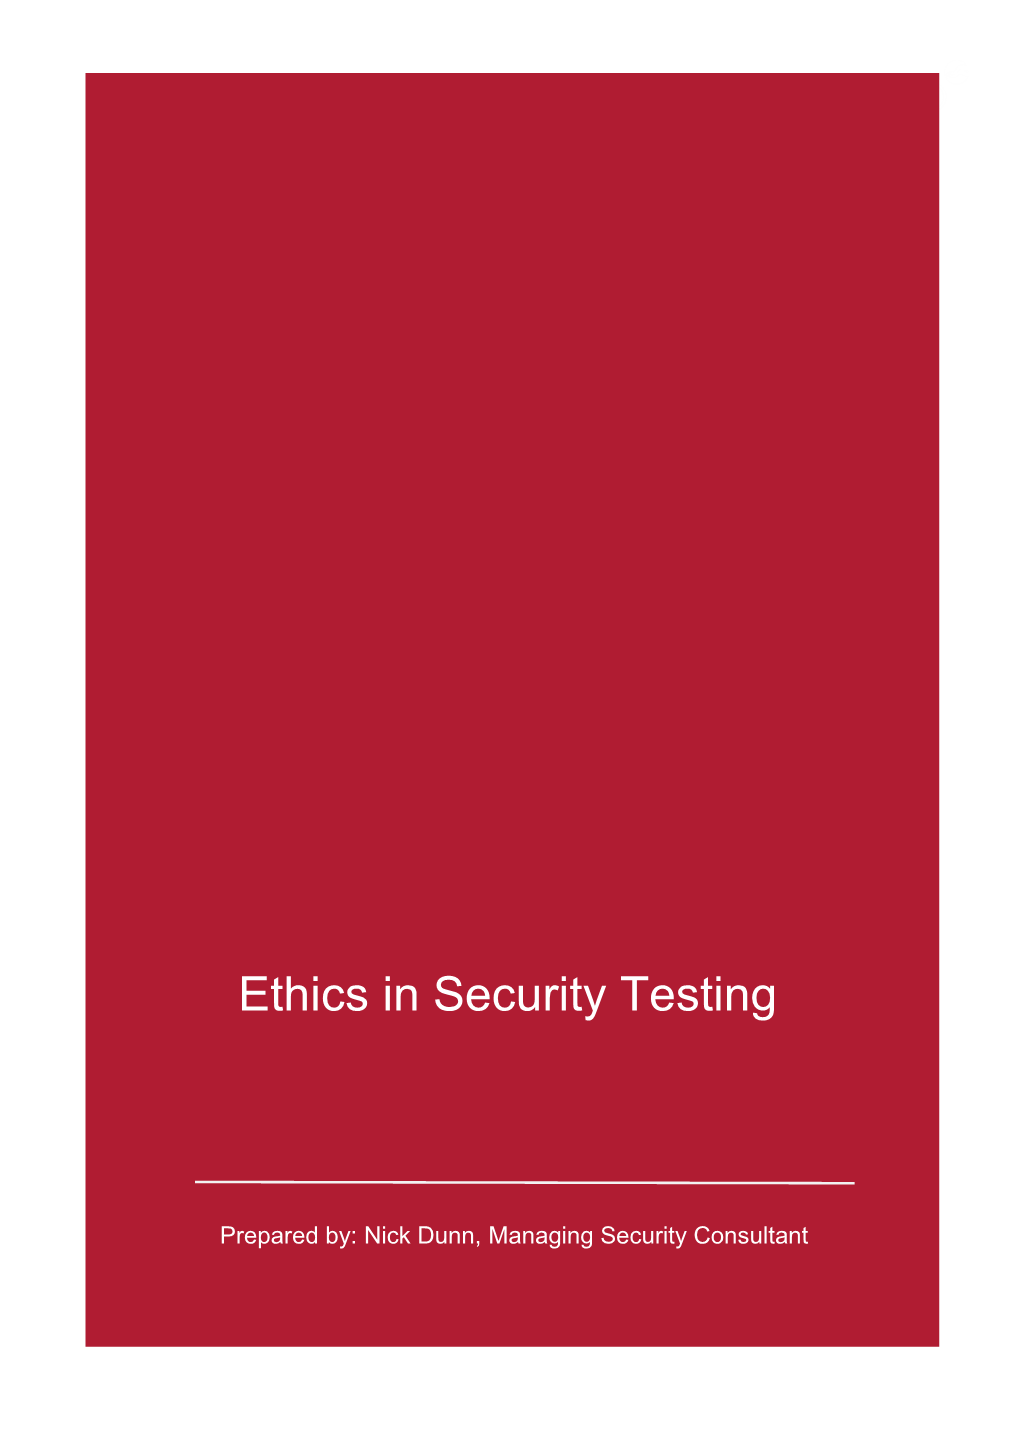 Ethics in Security Testing